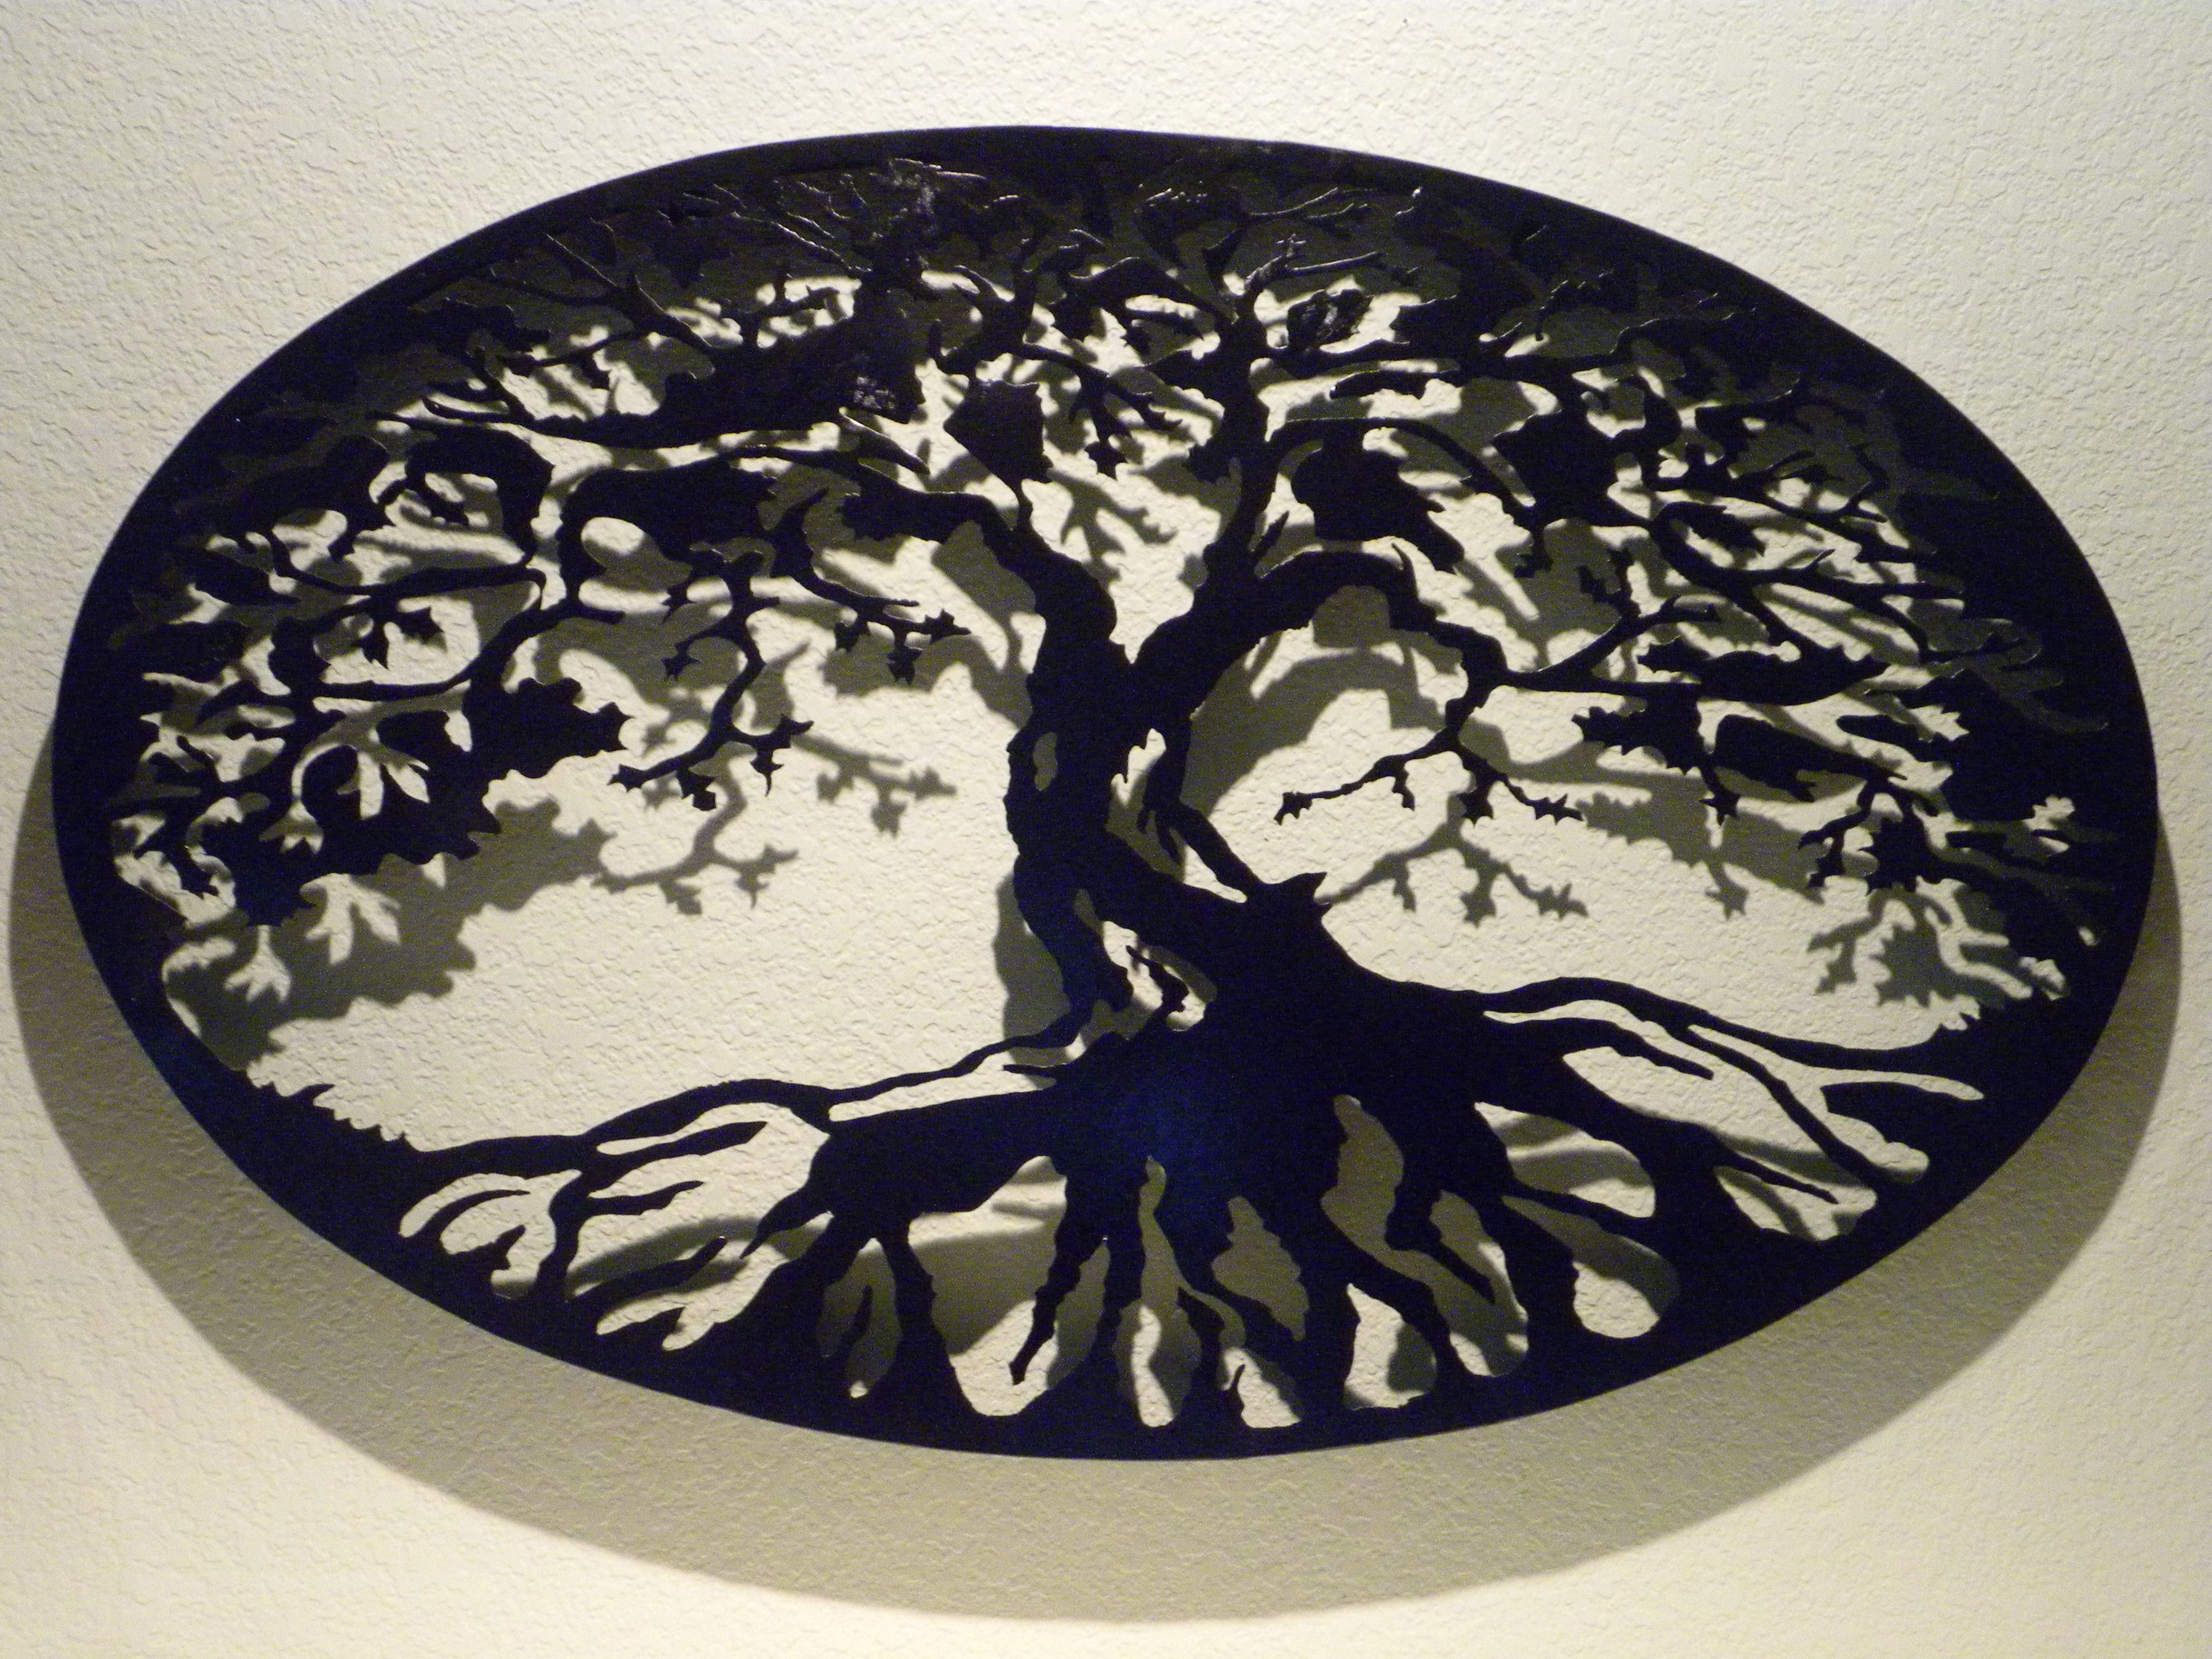 Most Recent Buy A Custom Oval Tree Of Life Metal Wall Art, Made To Order From With Tree Of Life Metal Wall Art (View 1 of 15)